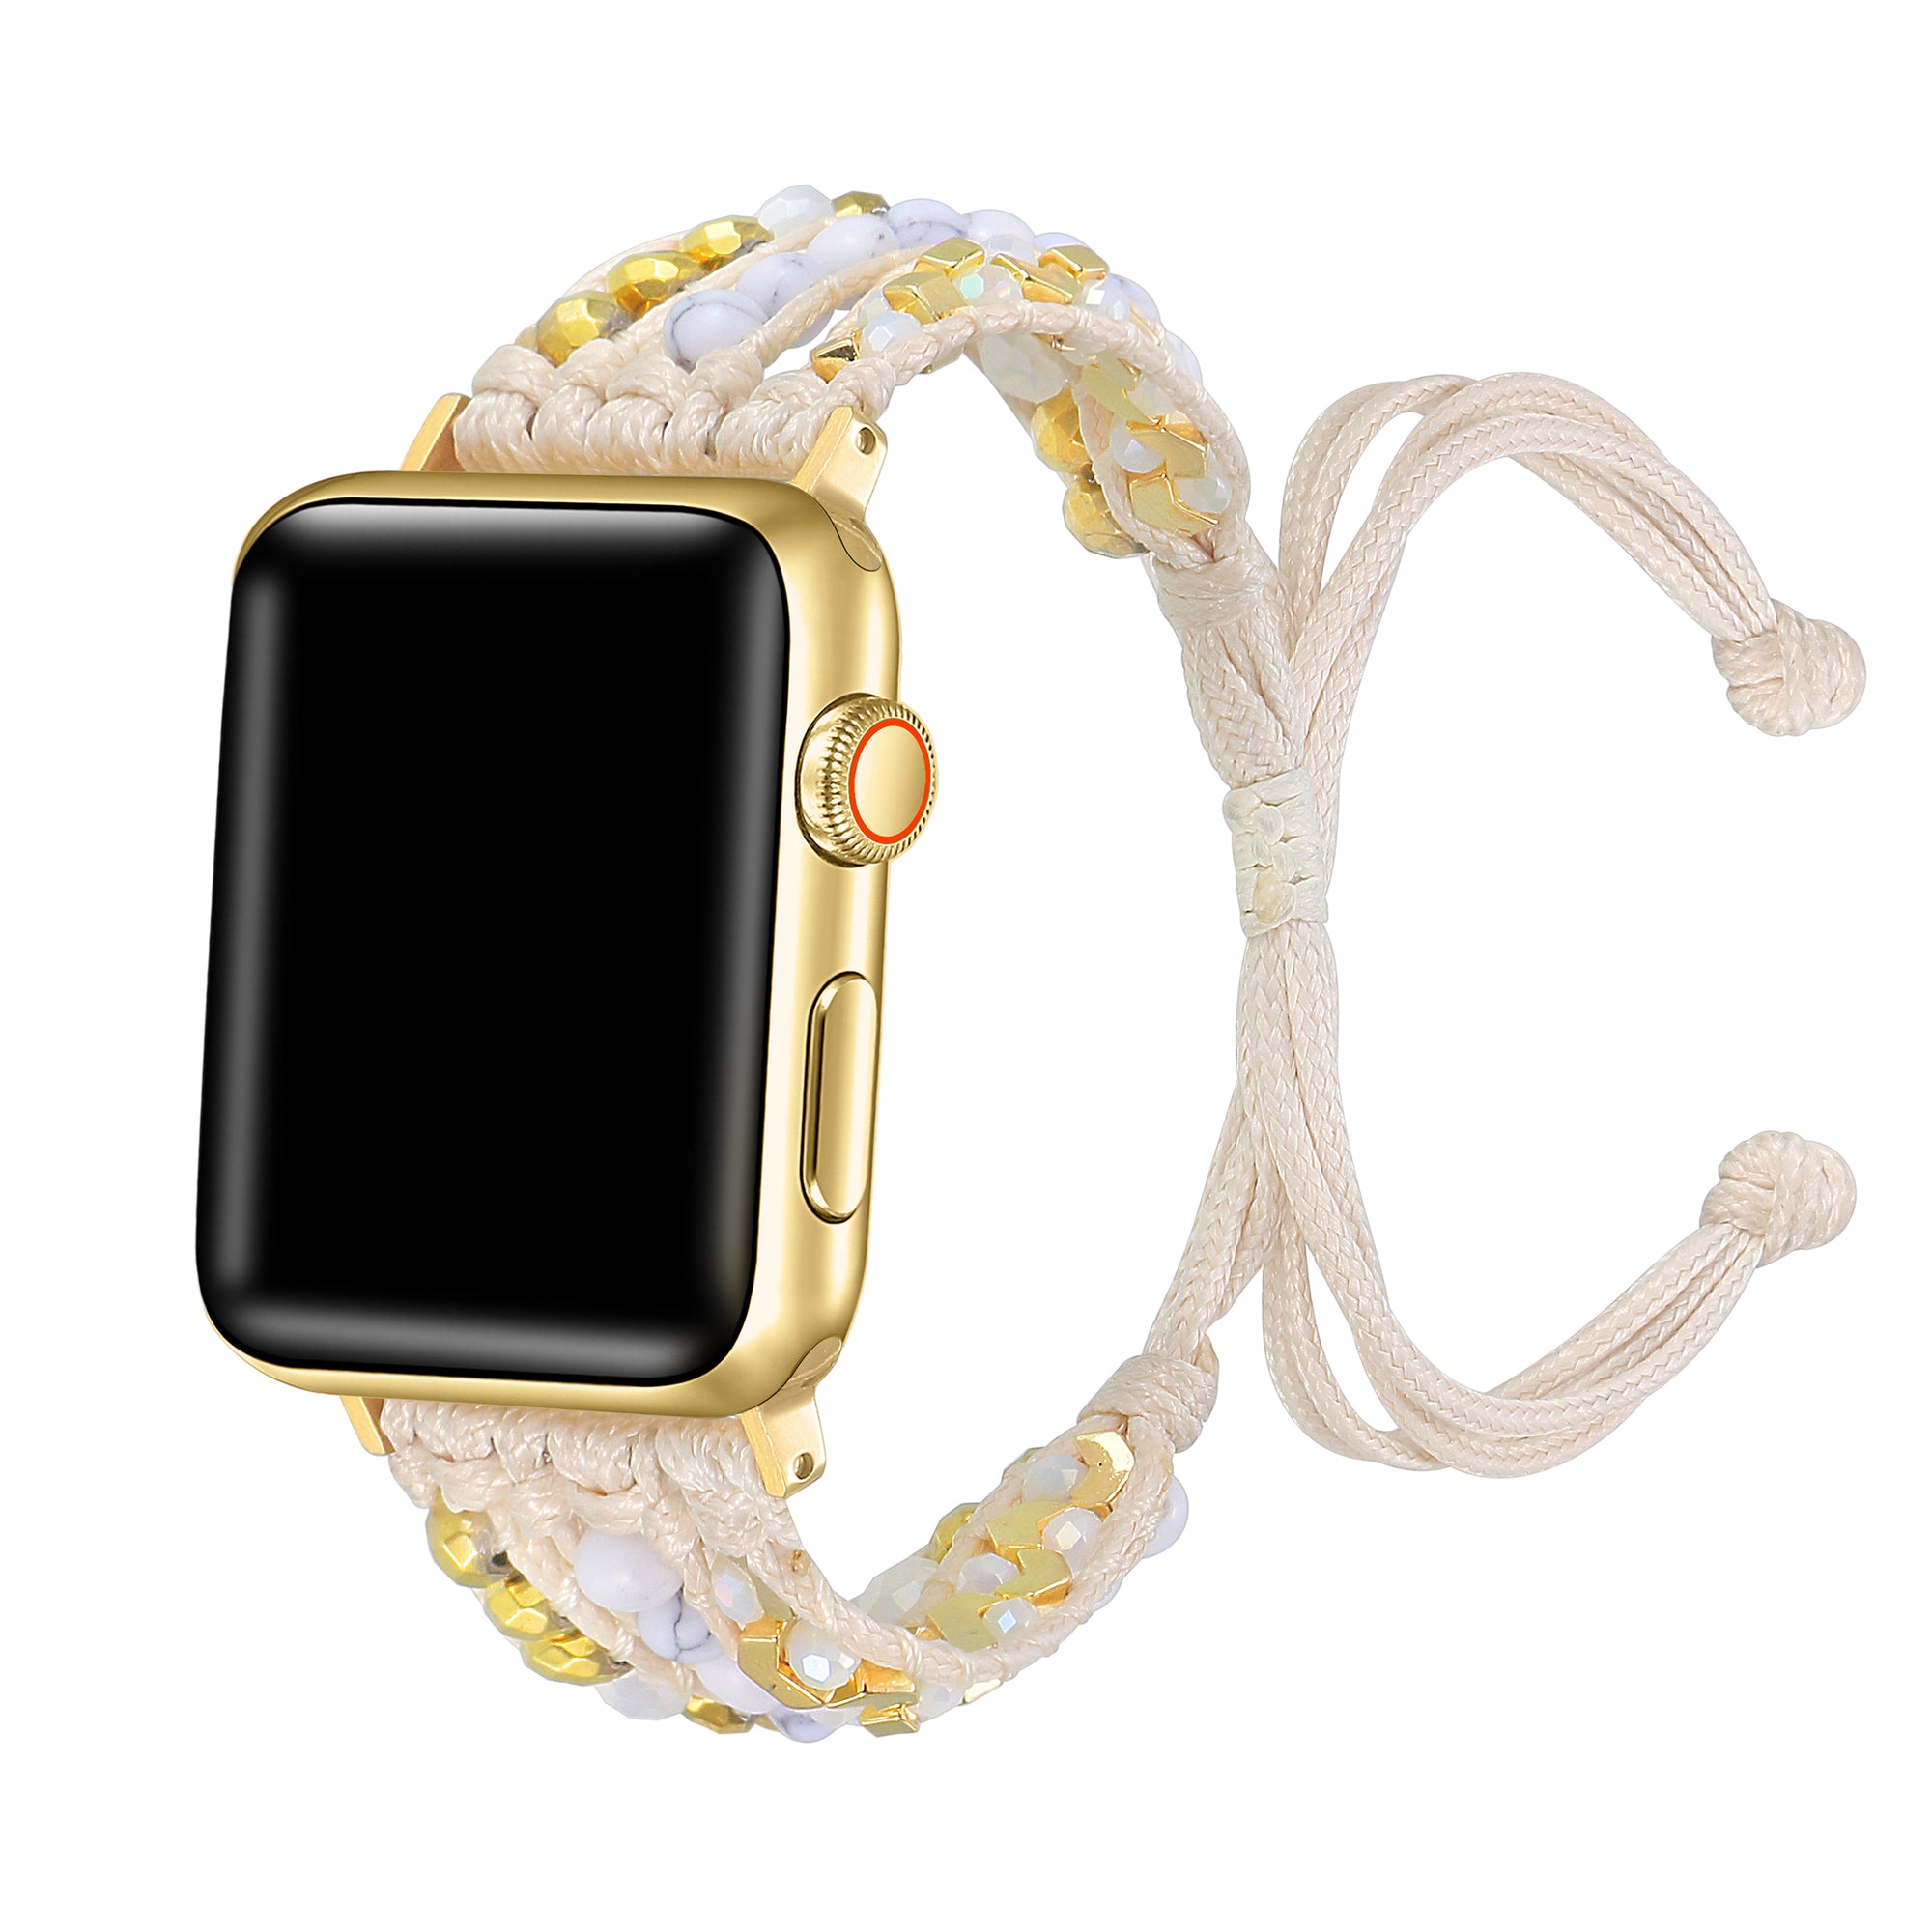 Gemma Weave Band for Apple Watch